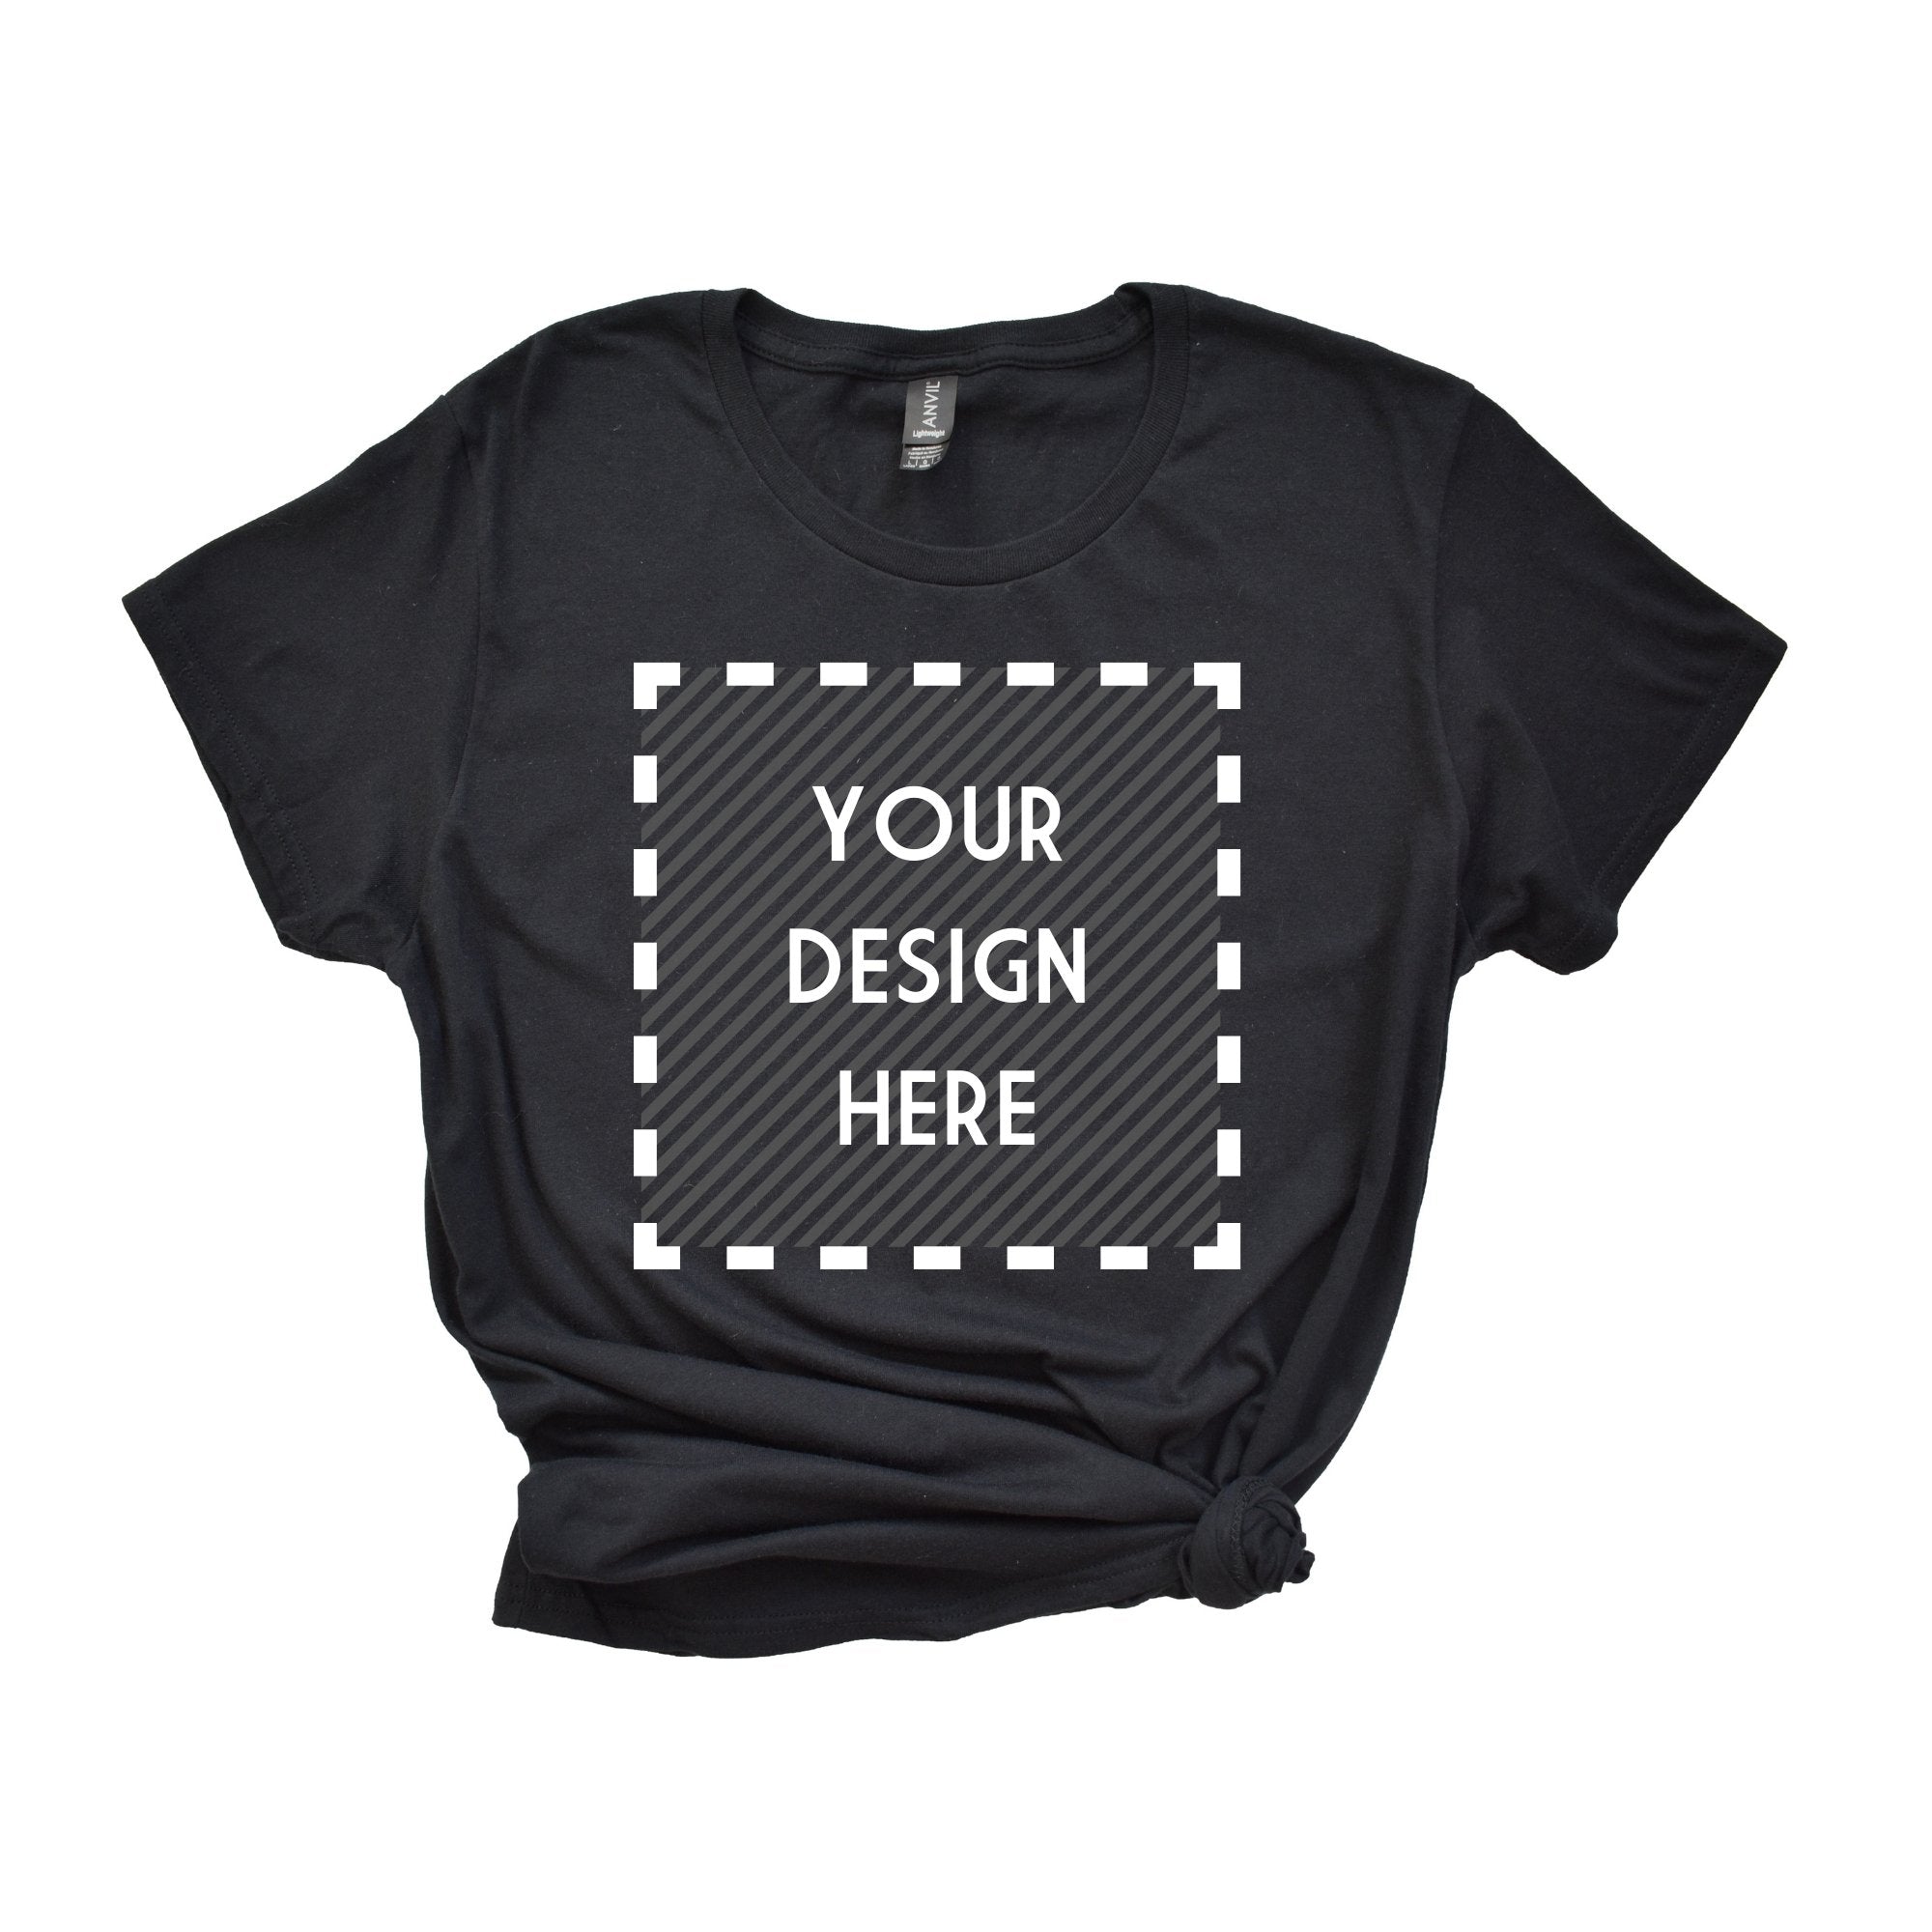 A black t-shirt with a customizable area on the front